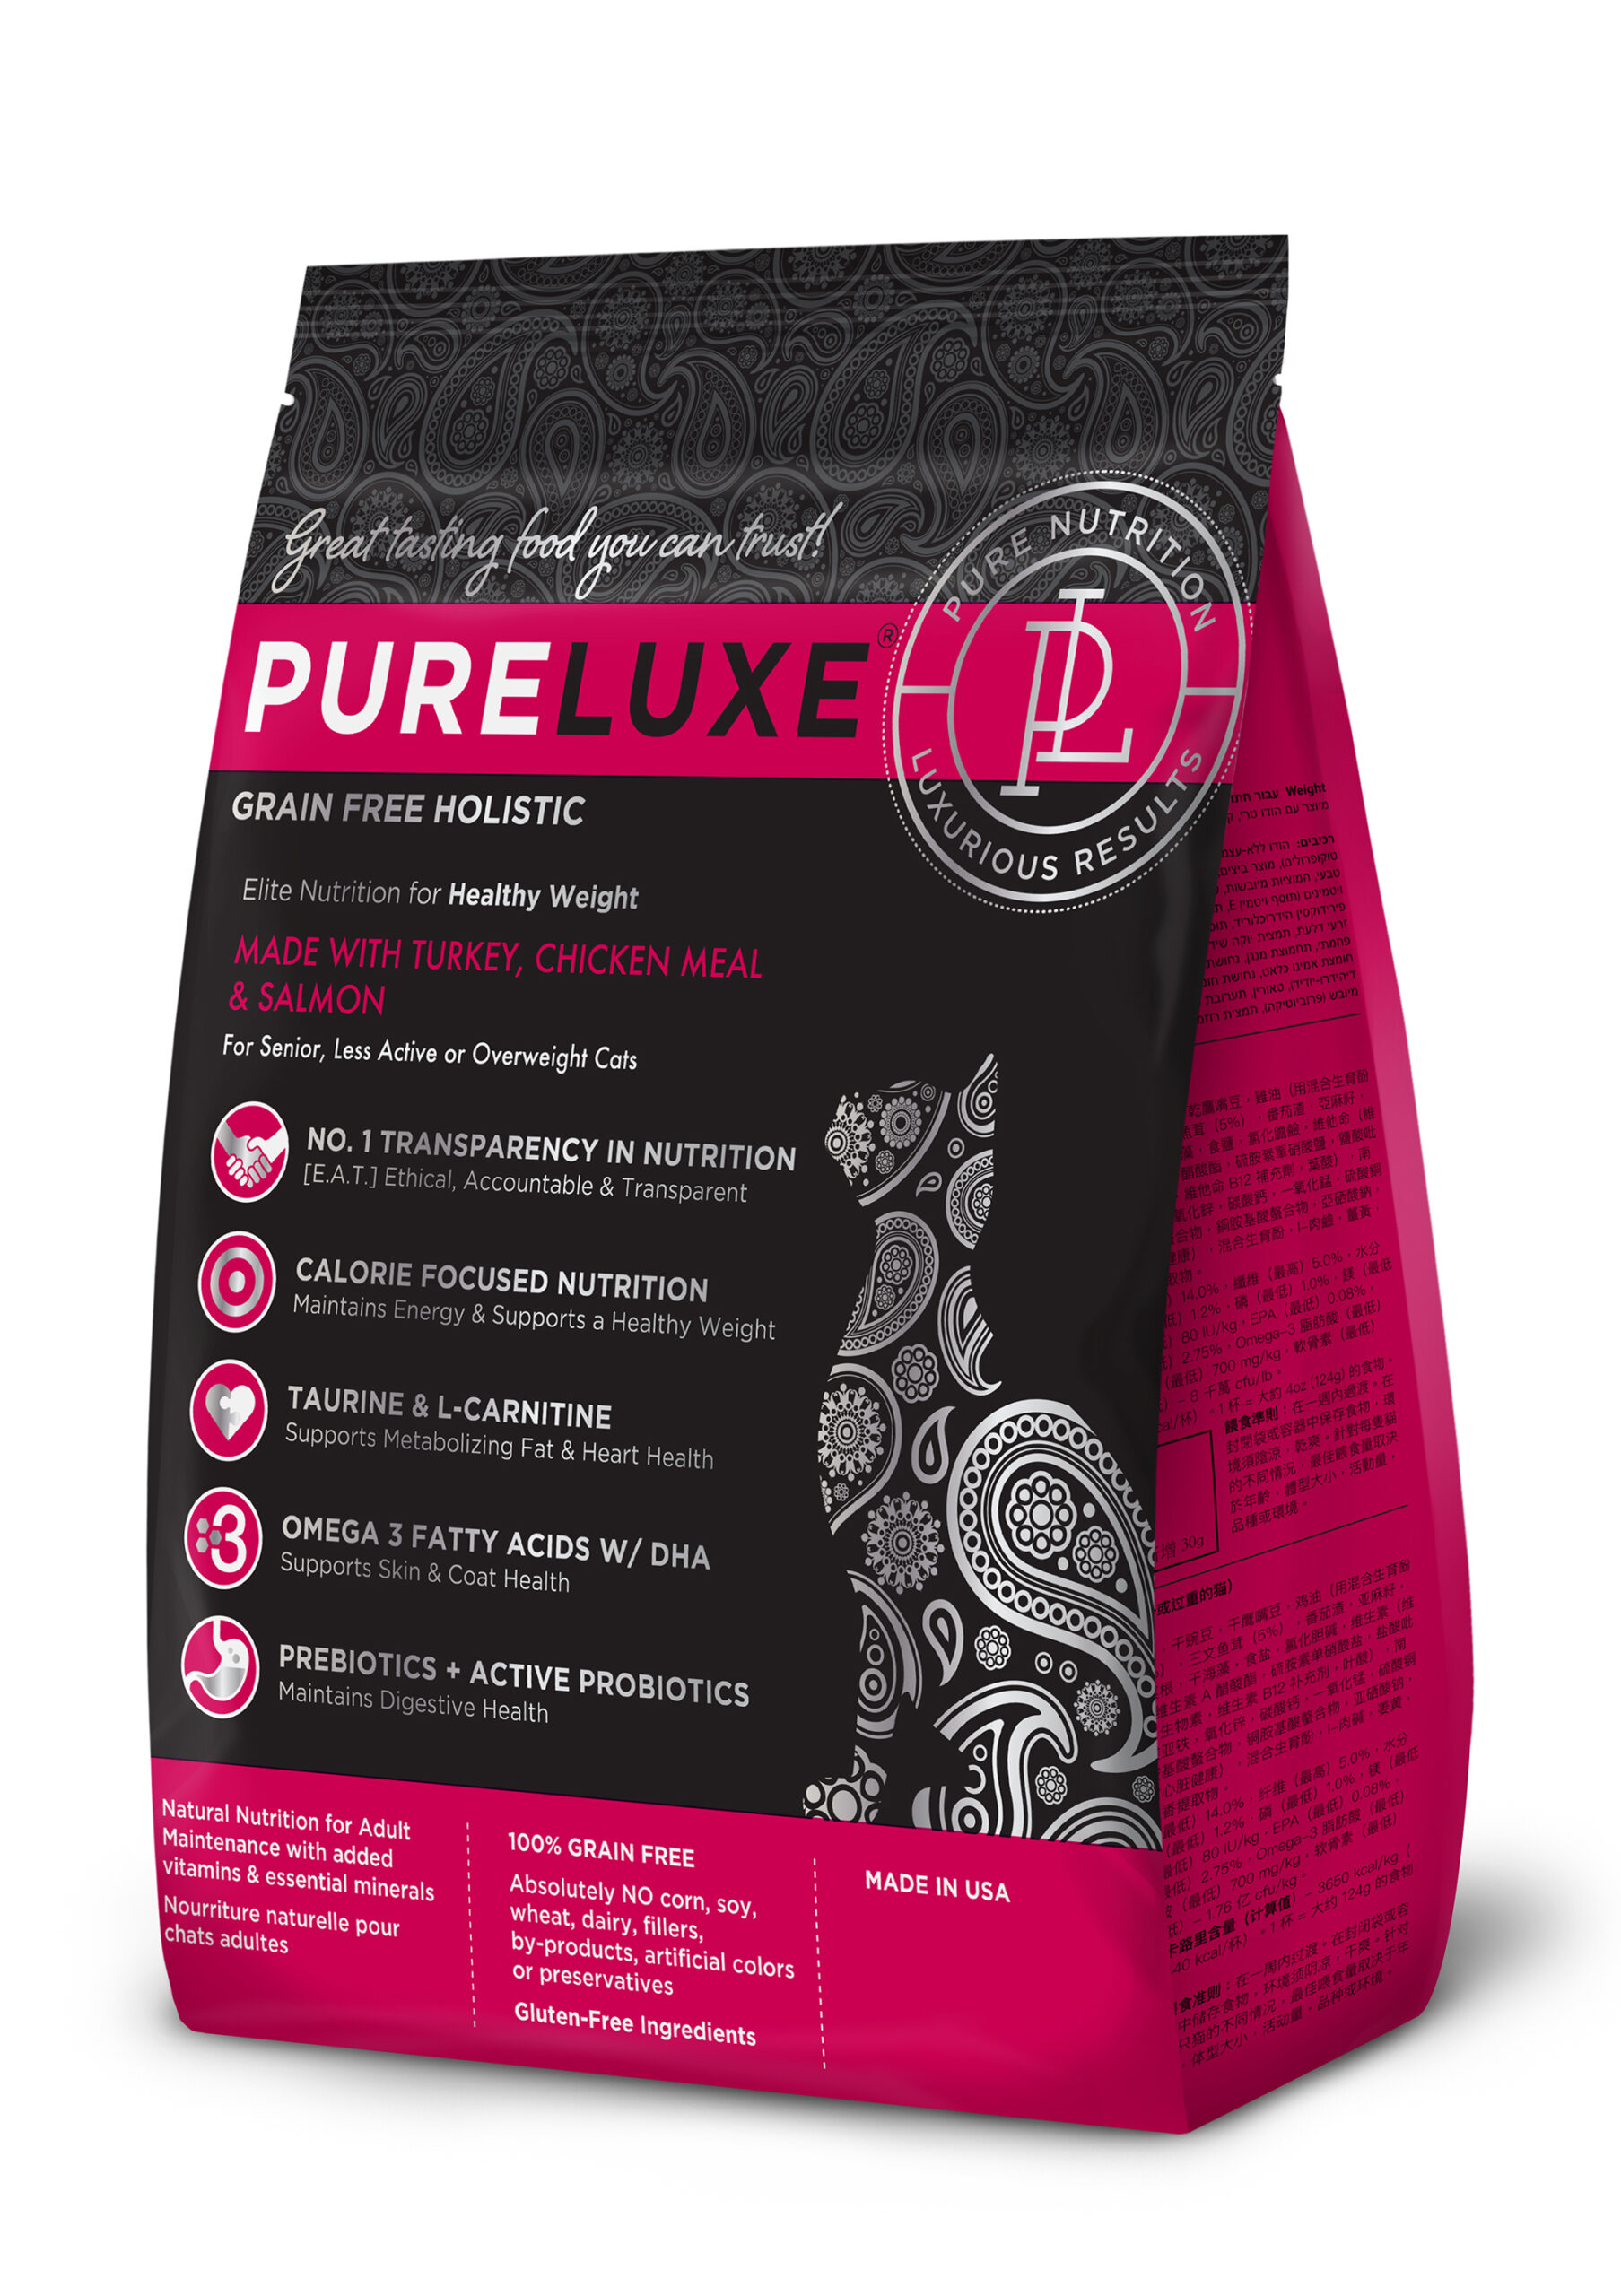 https://www.pureluxepetfood.com/wp-content/uploads/2017/03/Front_Healthy-Weight-1-scaled.jpg